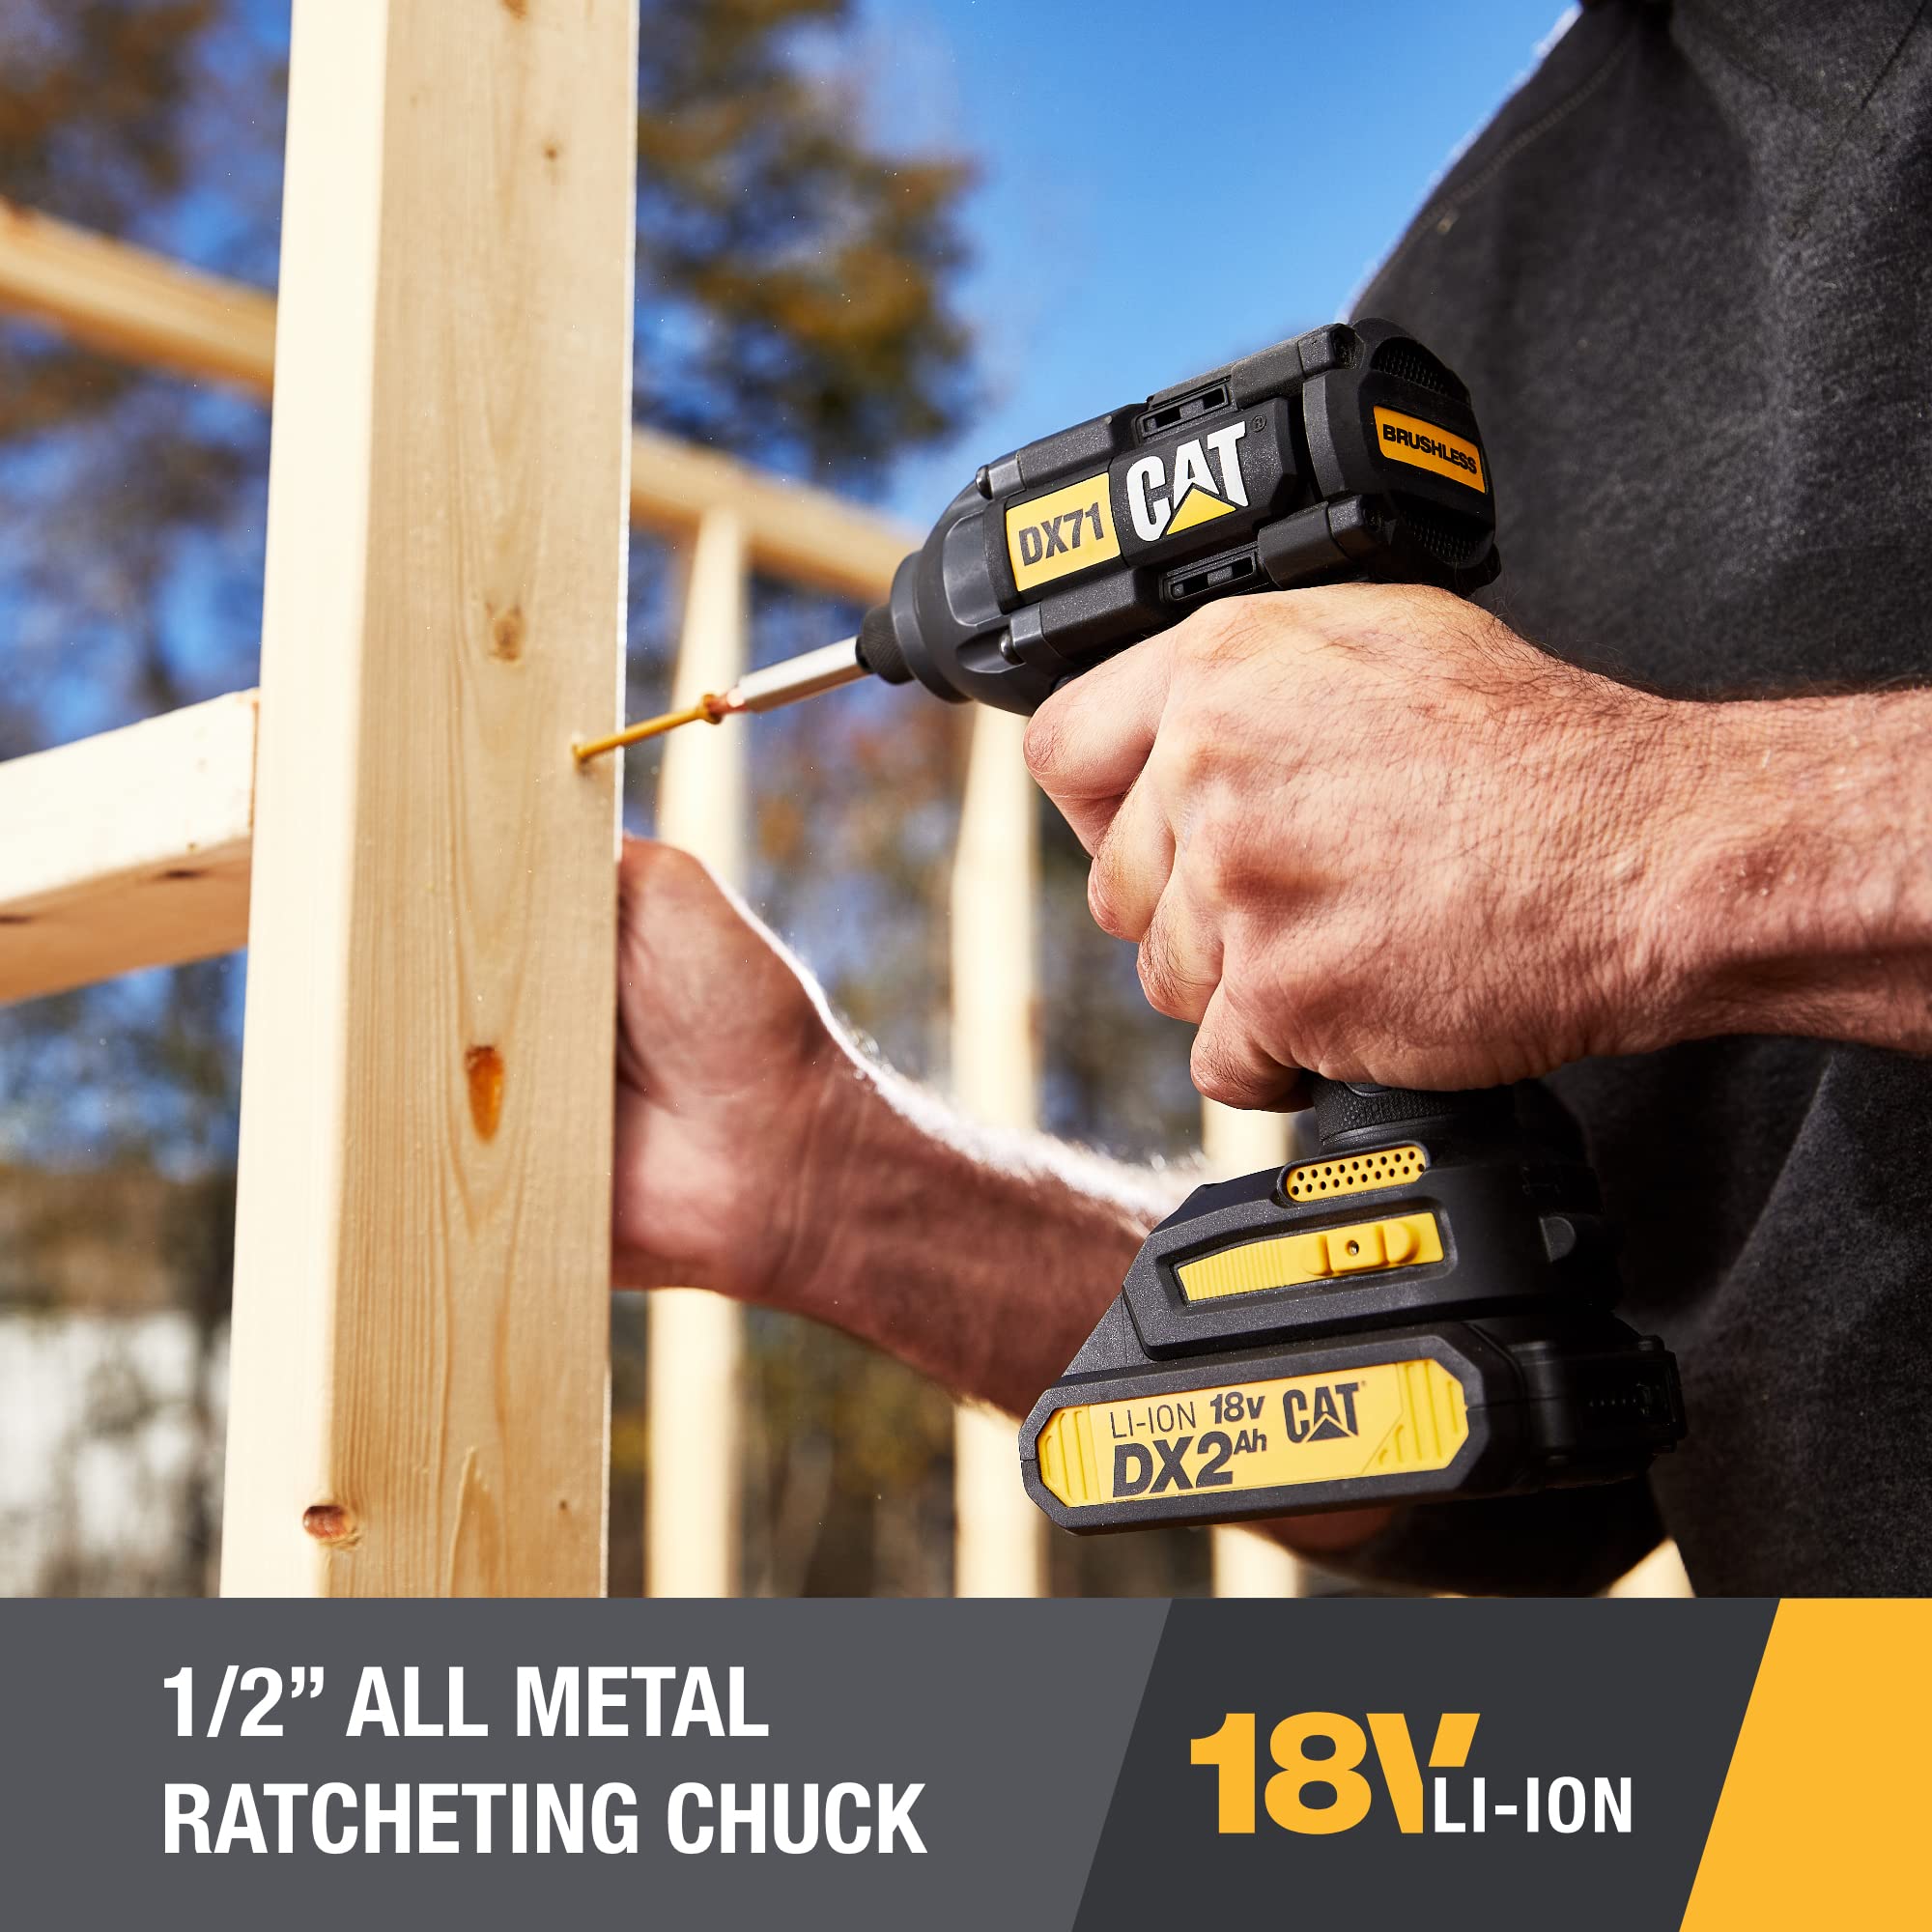 Caterpillar Cat® 18V 1 FOR ALL 1/2" Cordless Drill/Driver with Brushless Motor and 2 Batteries